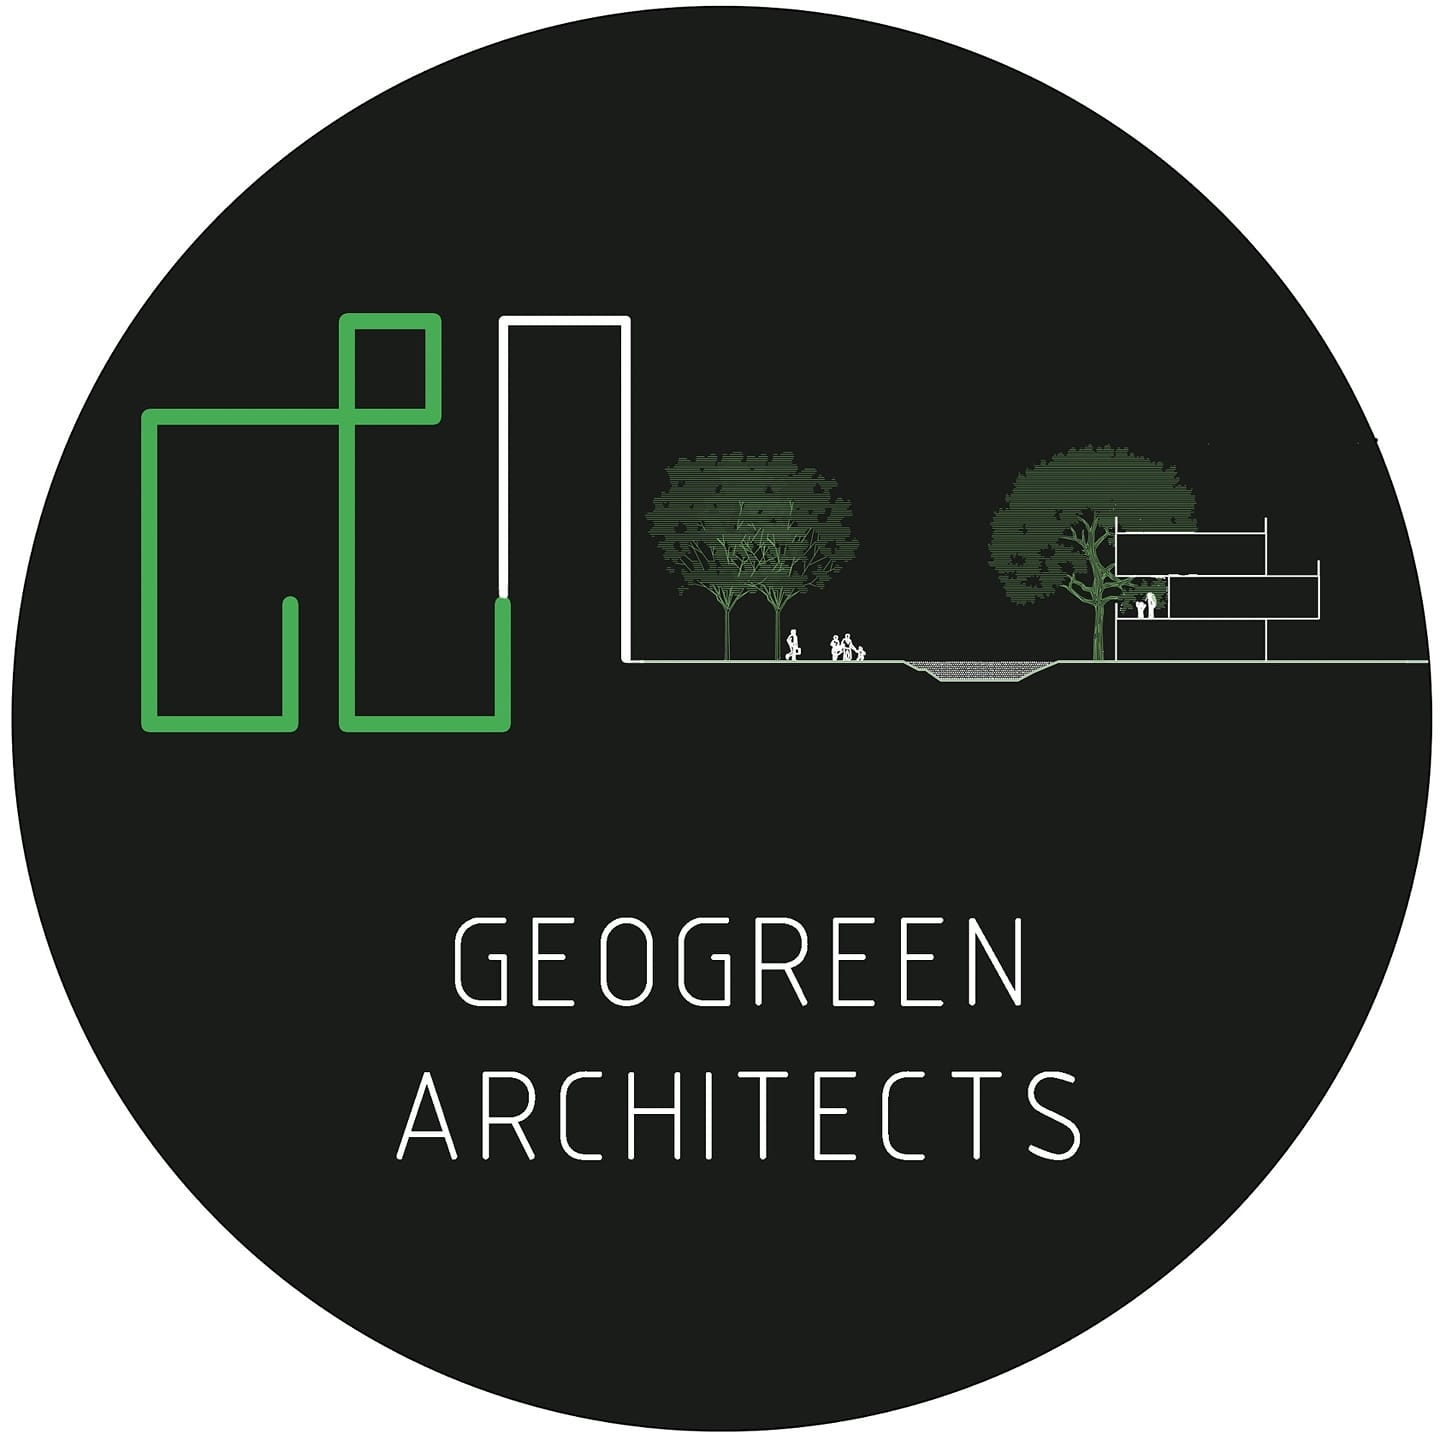 GeoGreen Architects|Legal Services|Professional Services